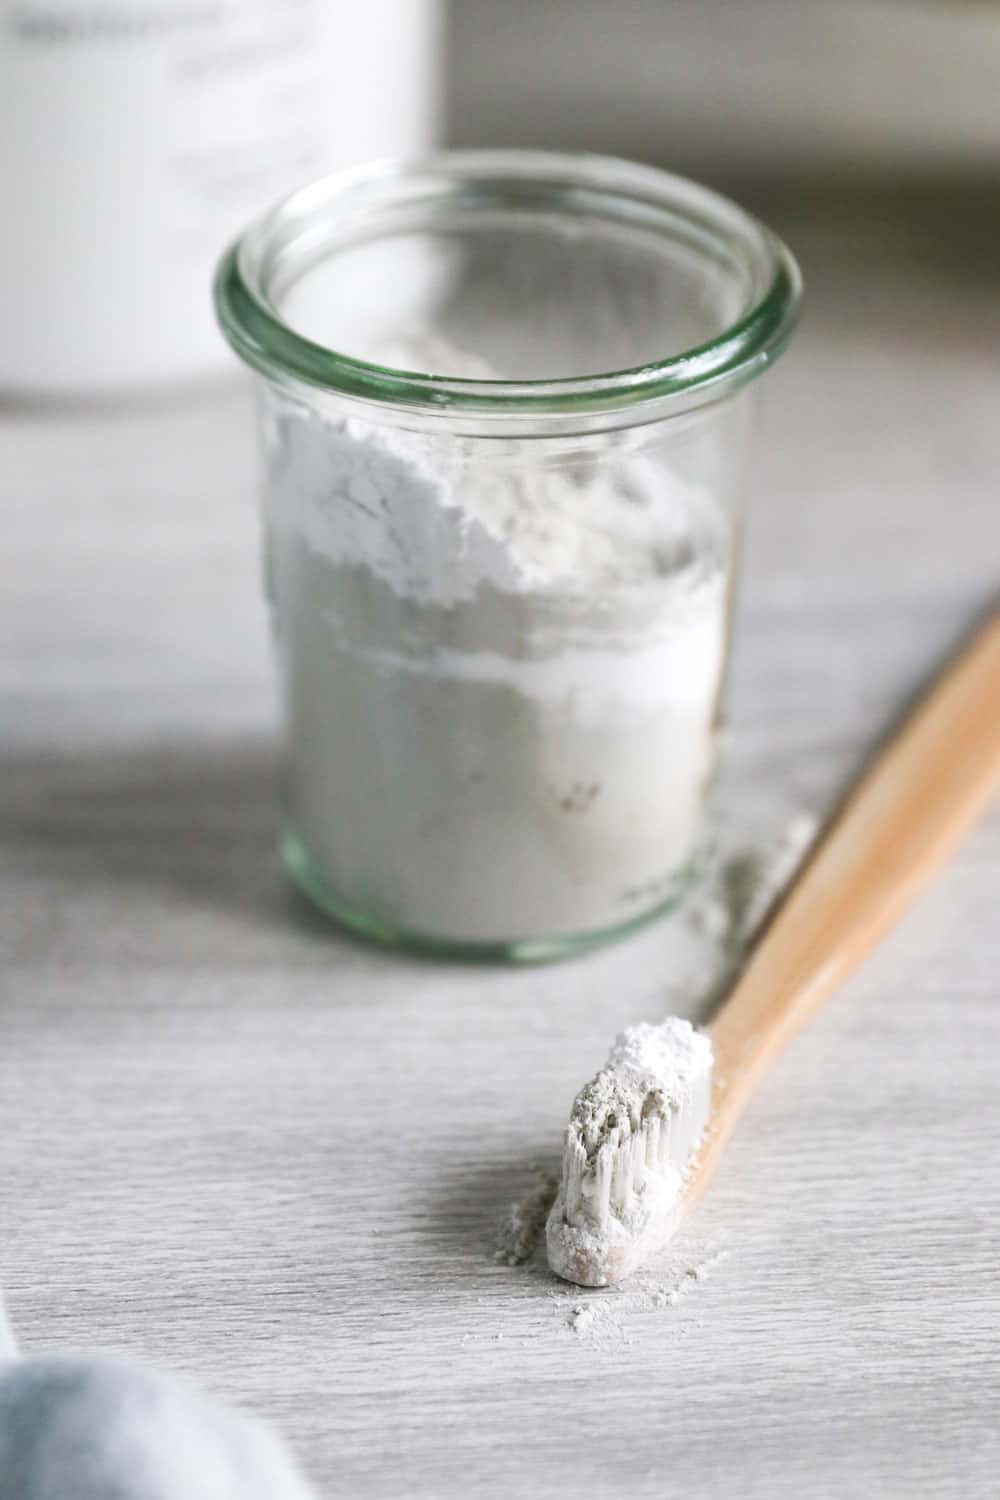 Whiten Your Teeth Naturally With This DIY Brightening Powder